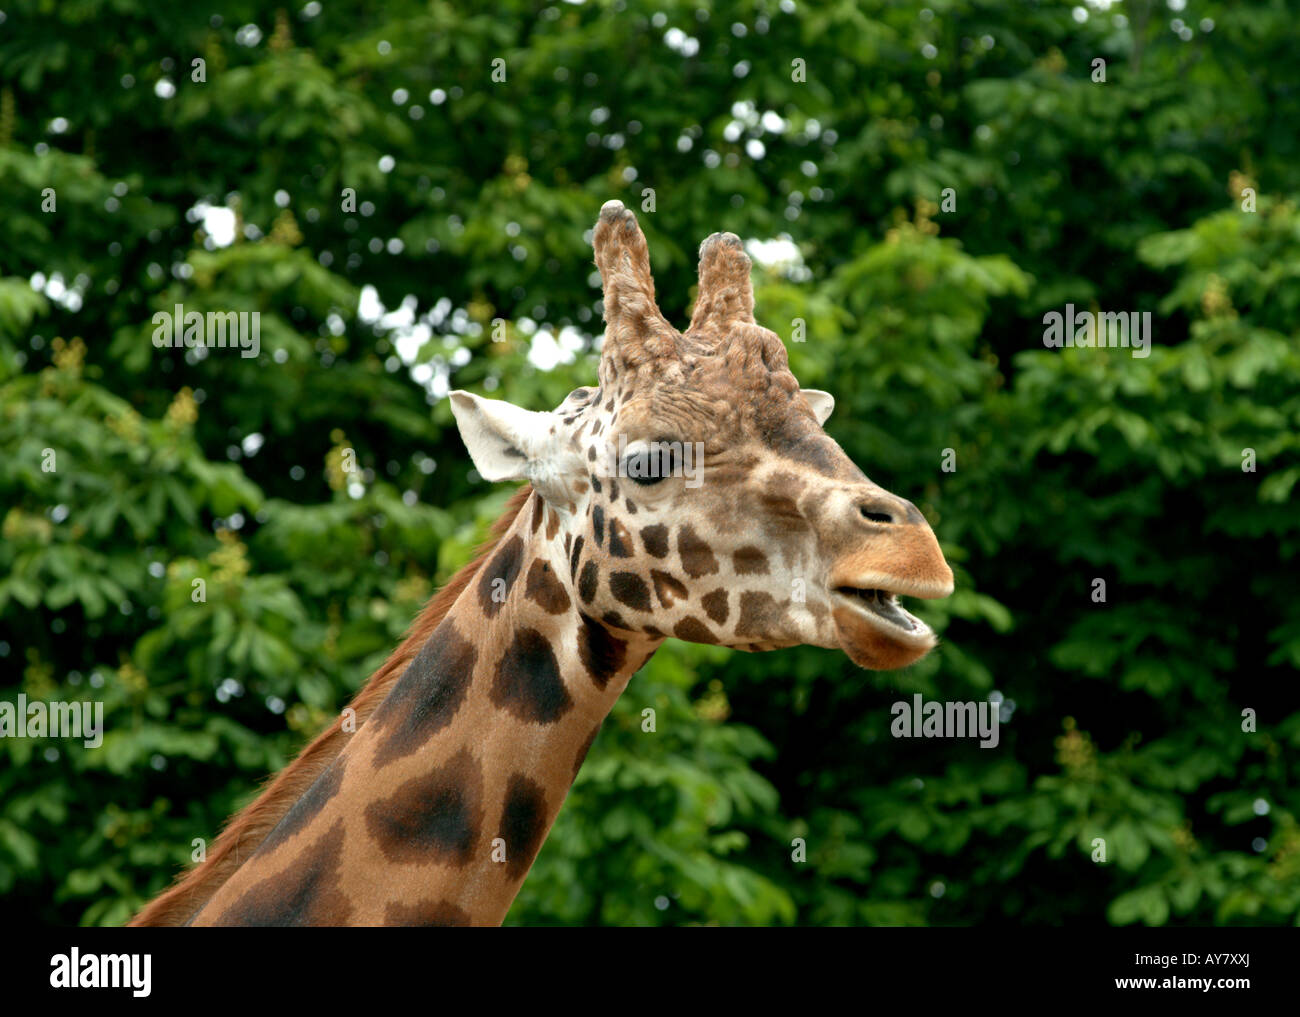 Head of giraffe Edinburgh zoo mouth open looking at camera green leaves behind Stock Photo